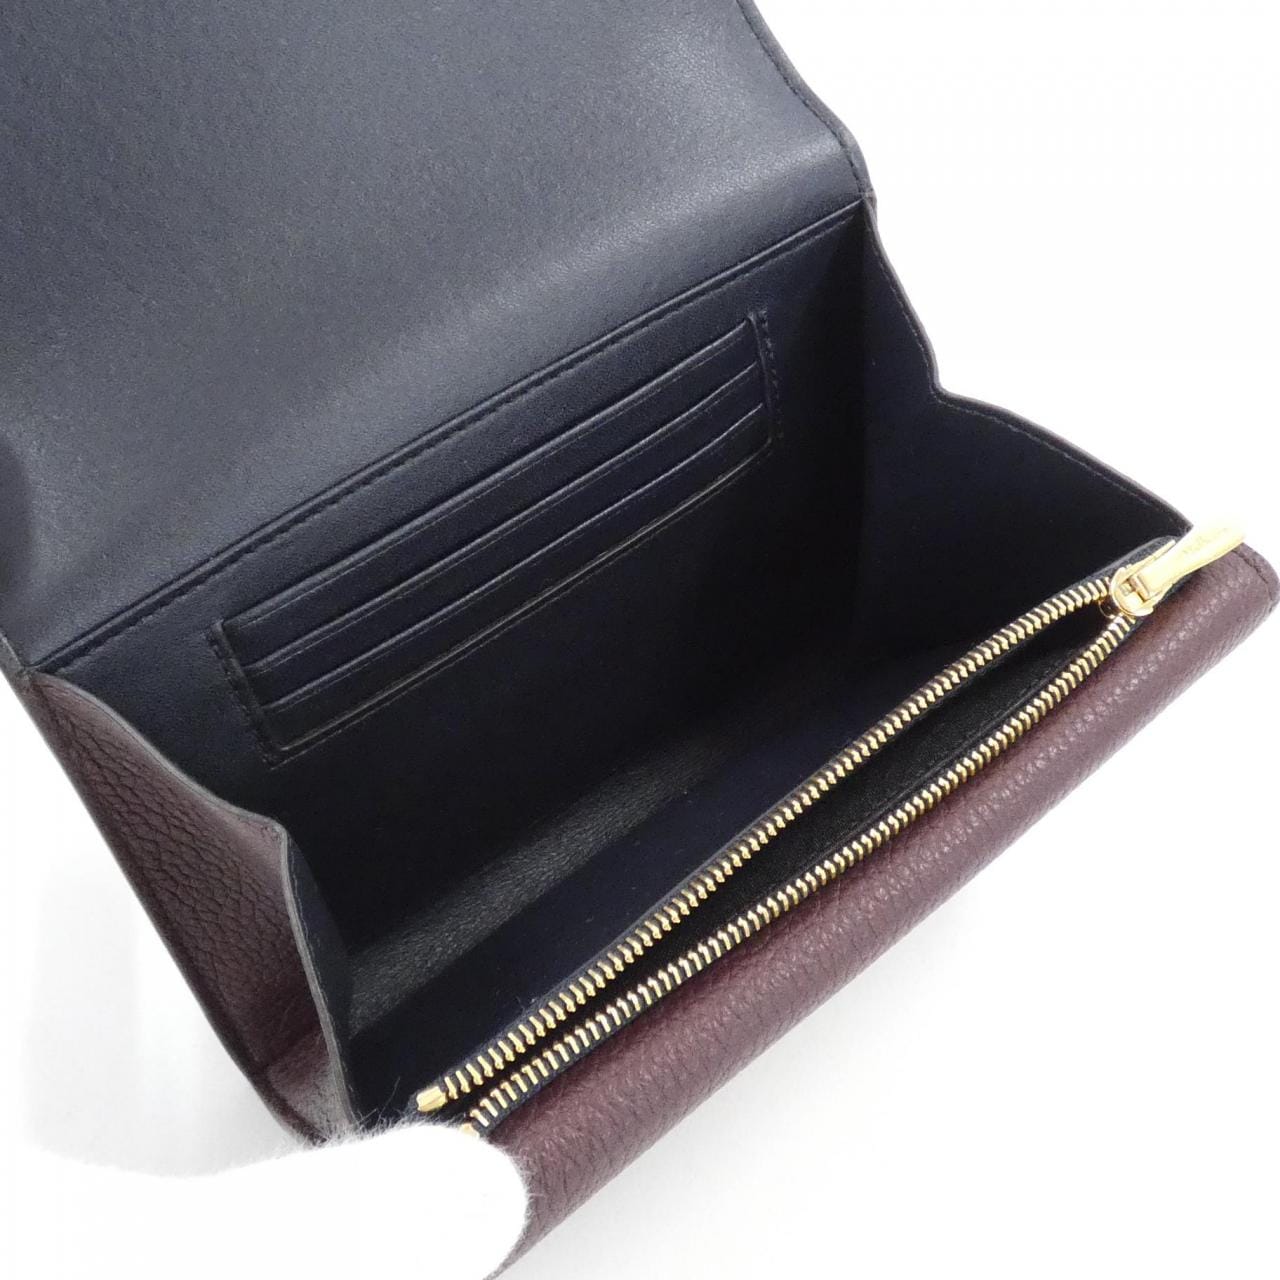 [BRAND NEW] Mulberry Harlow RL5656 013 Wallet